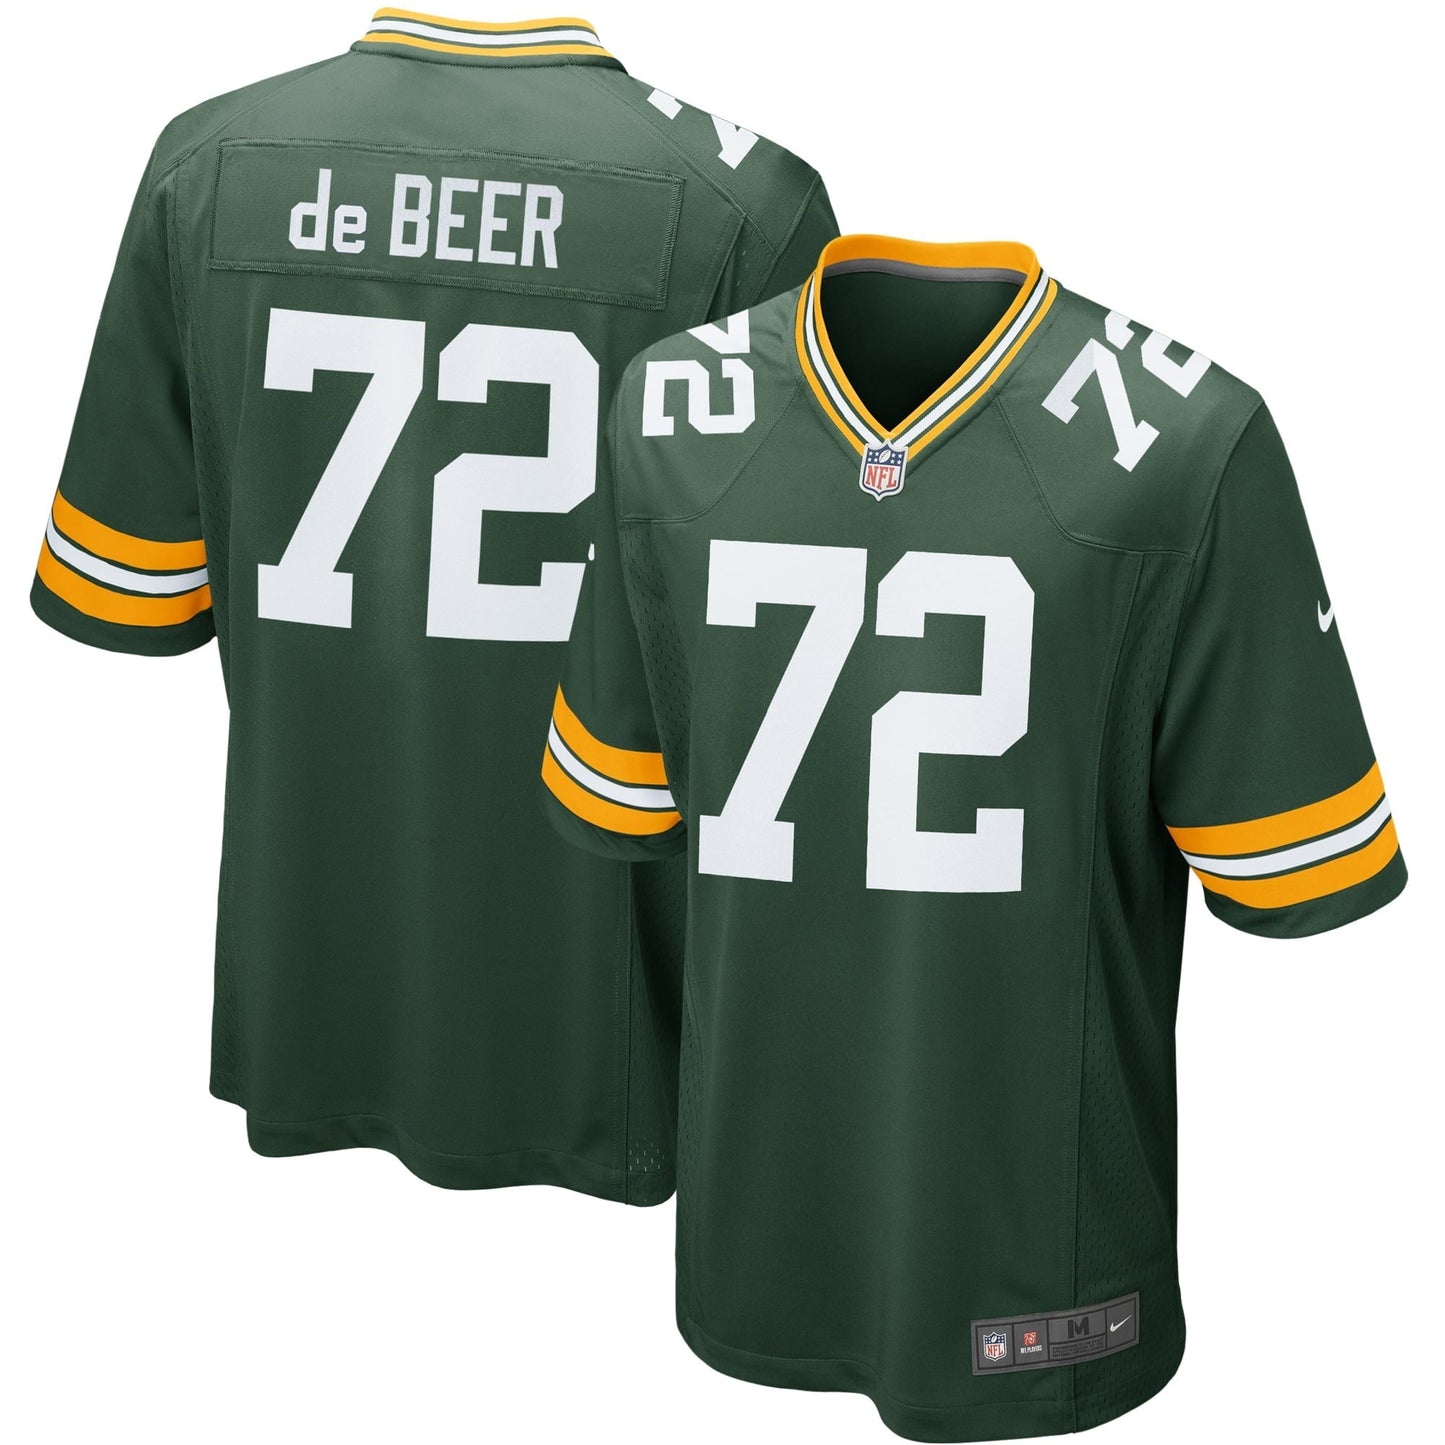 Youth Nike Gerhard de Beer Green Green Bay Packers Game Jersey